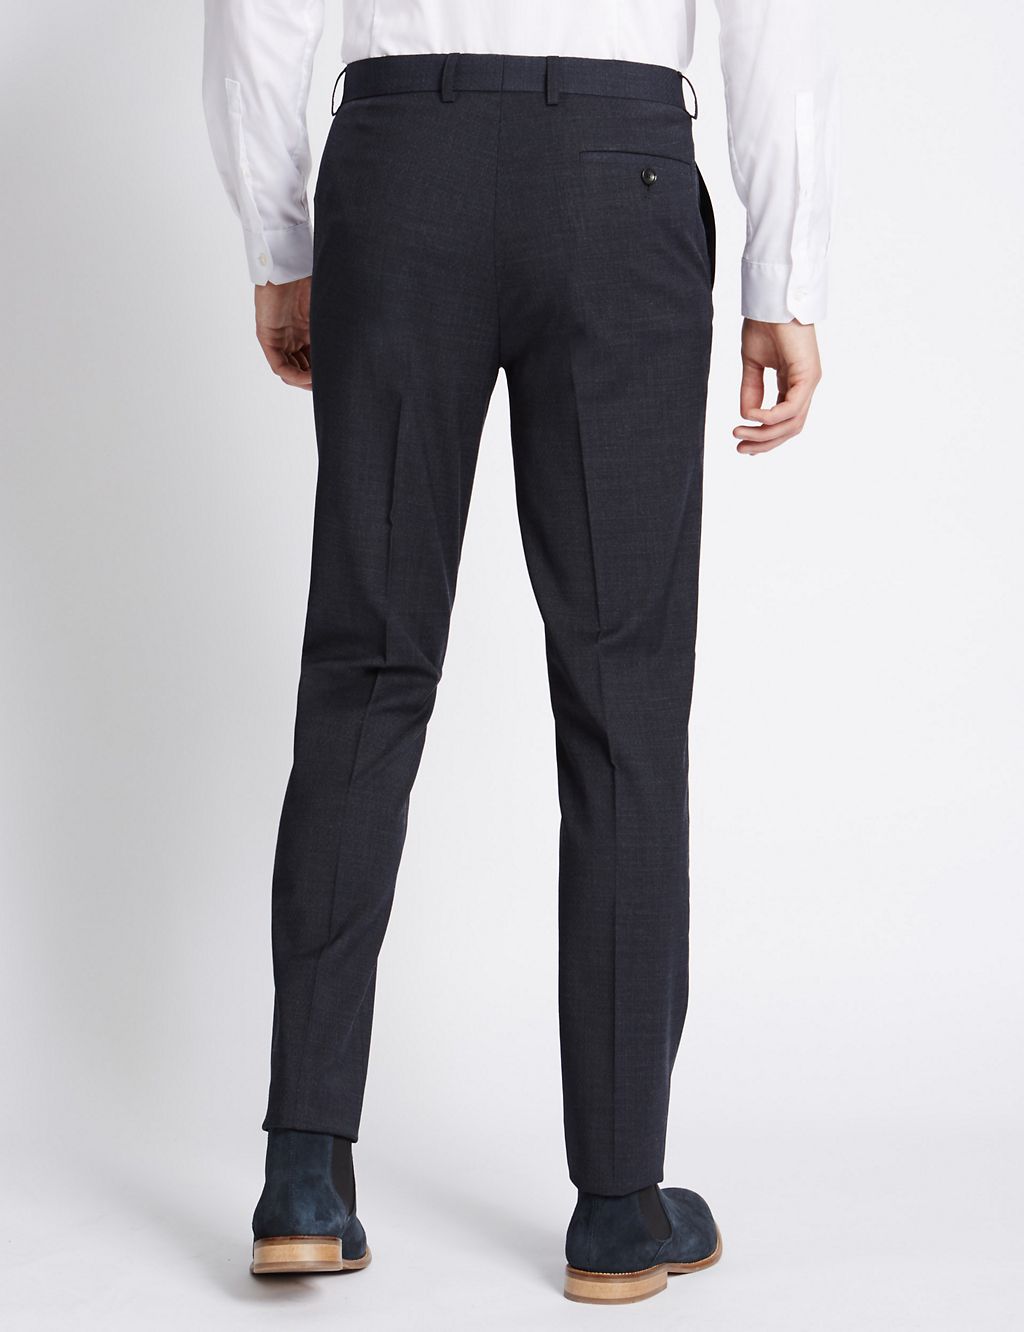 Charcoal Textured Modern Slim Fit Trousers 2 of 4